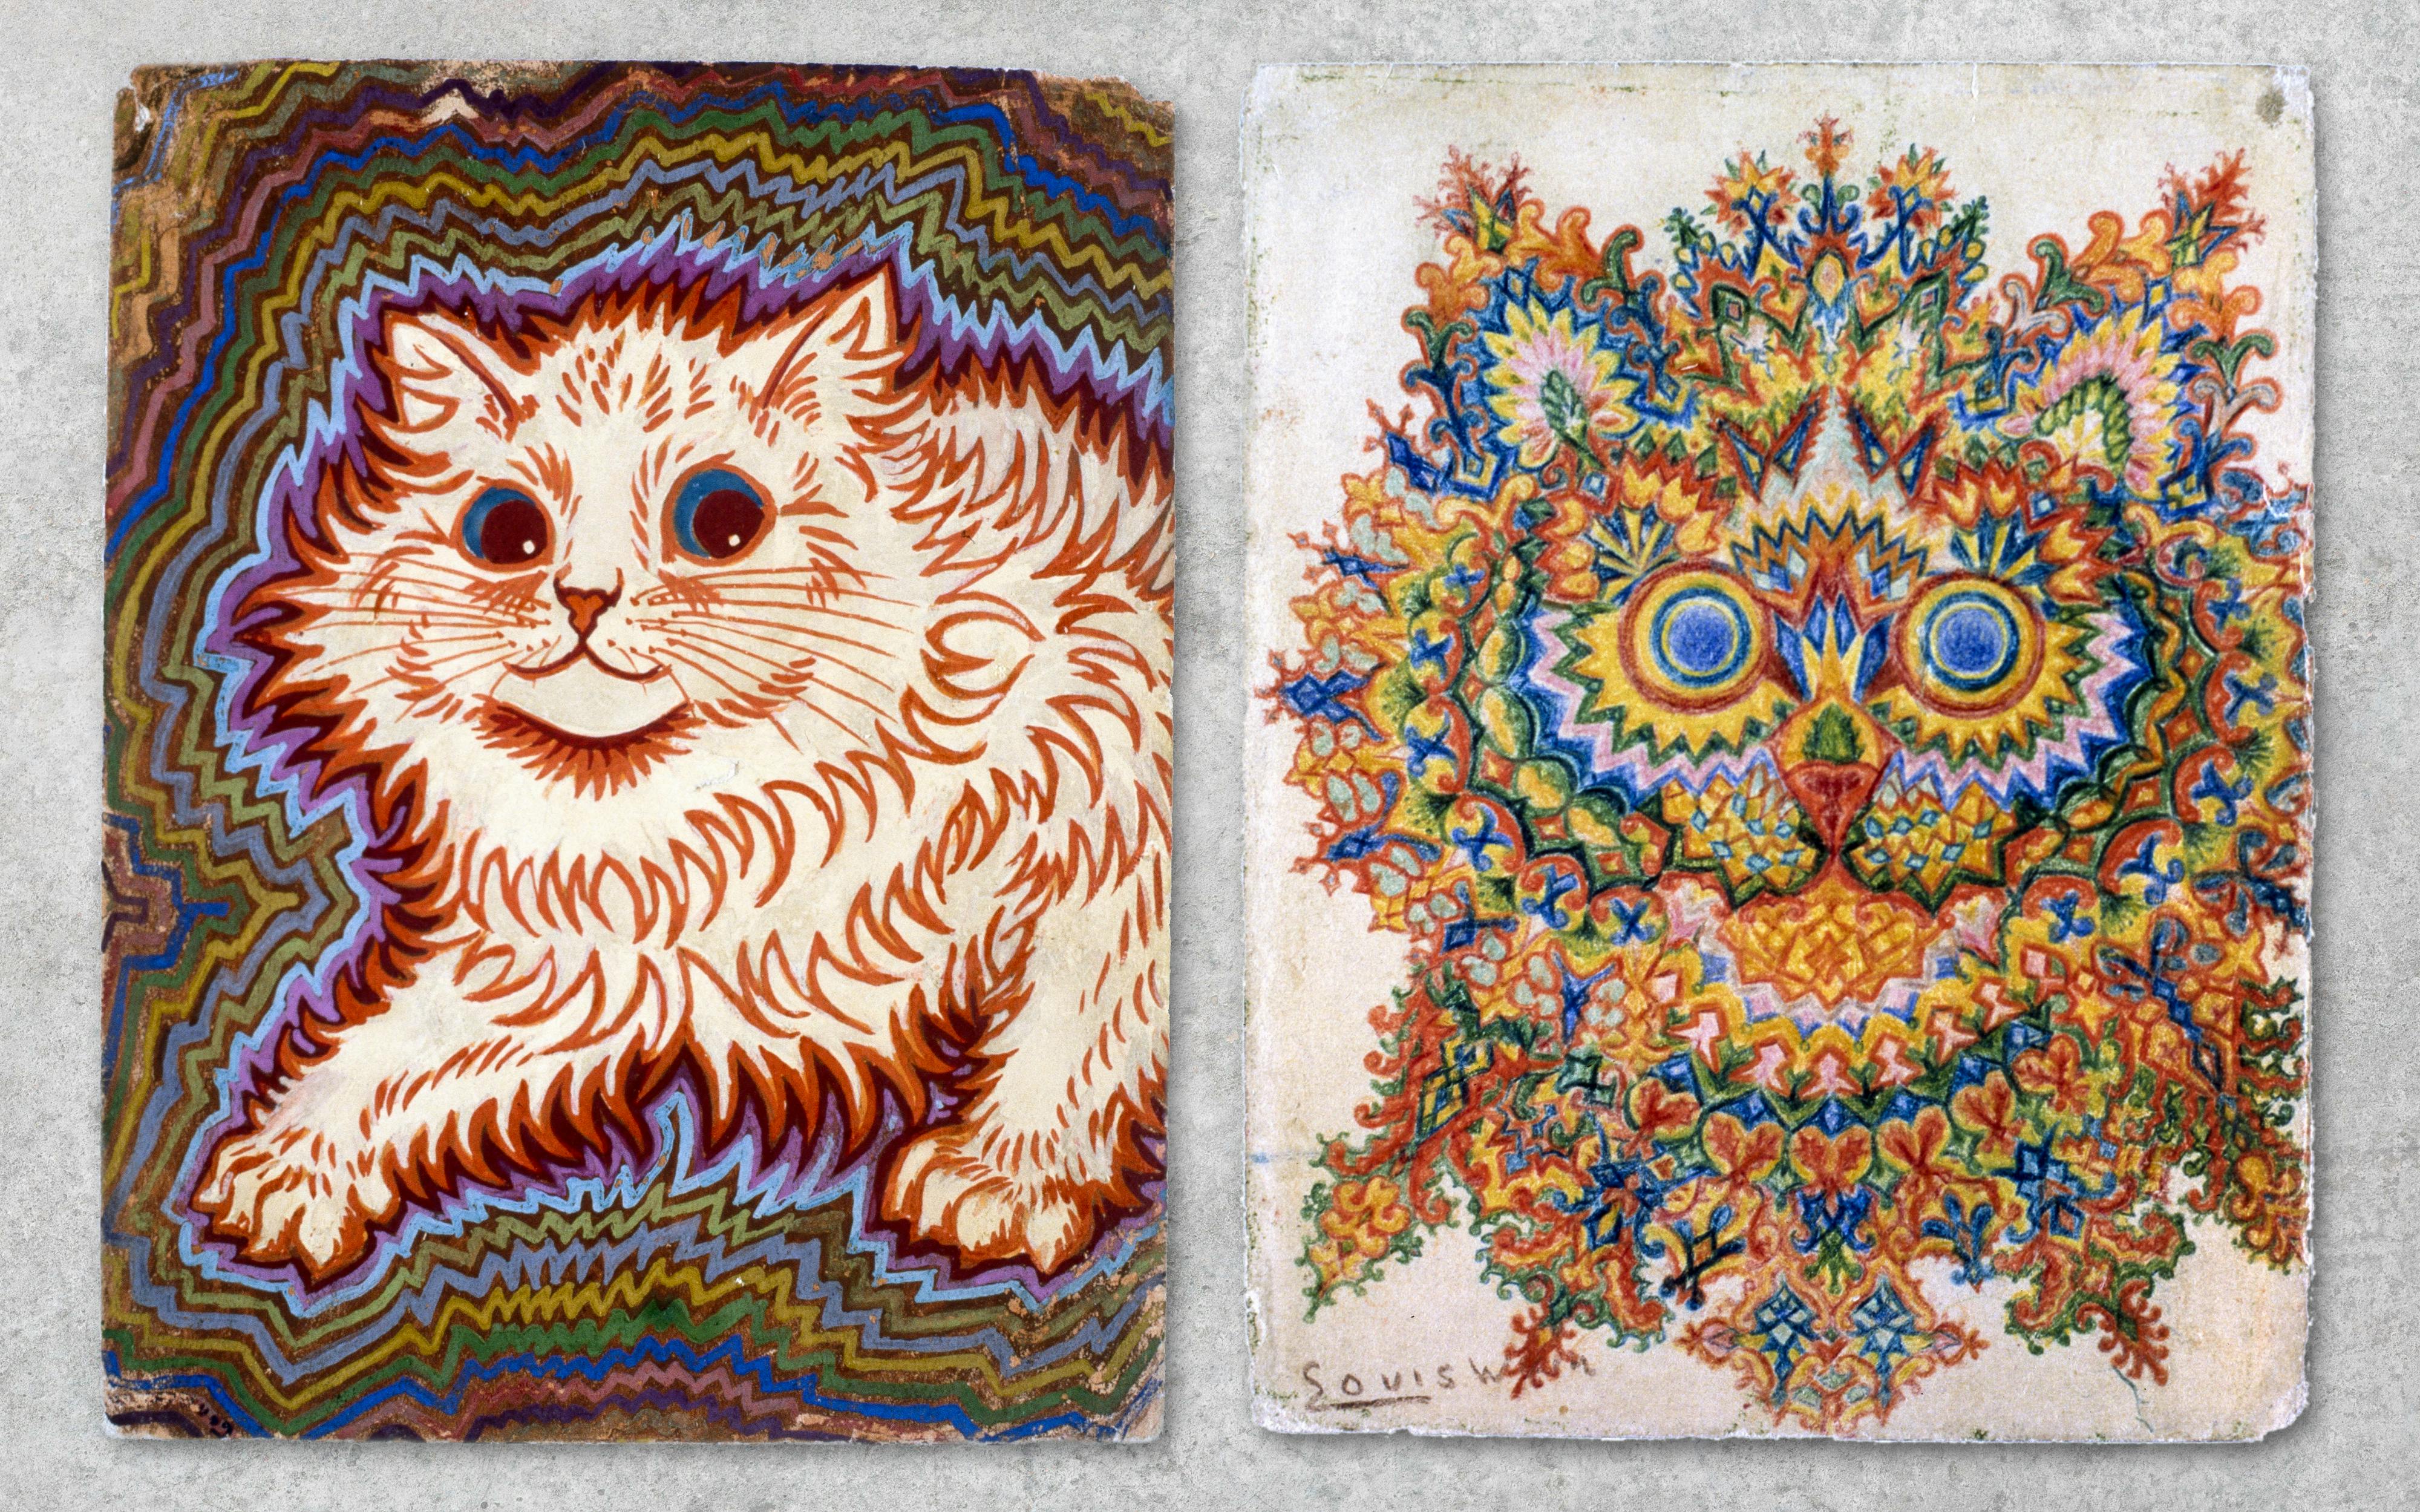 Louis Wain's cryptic cats